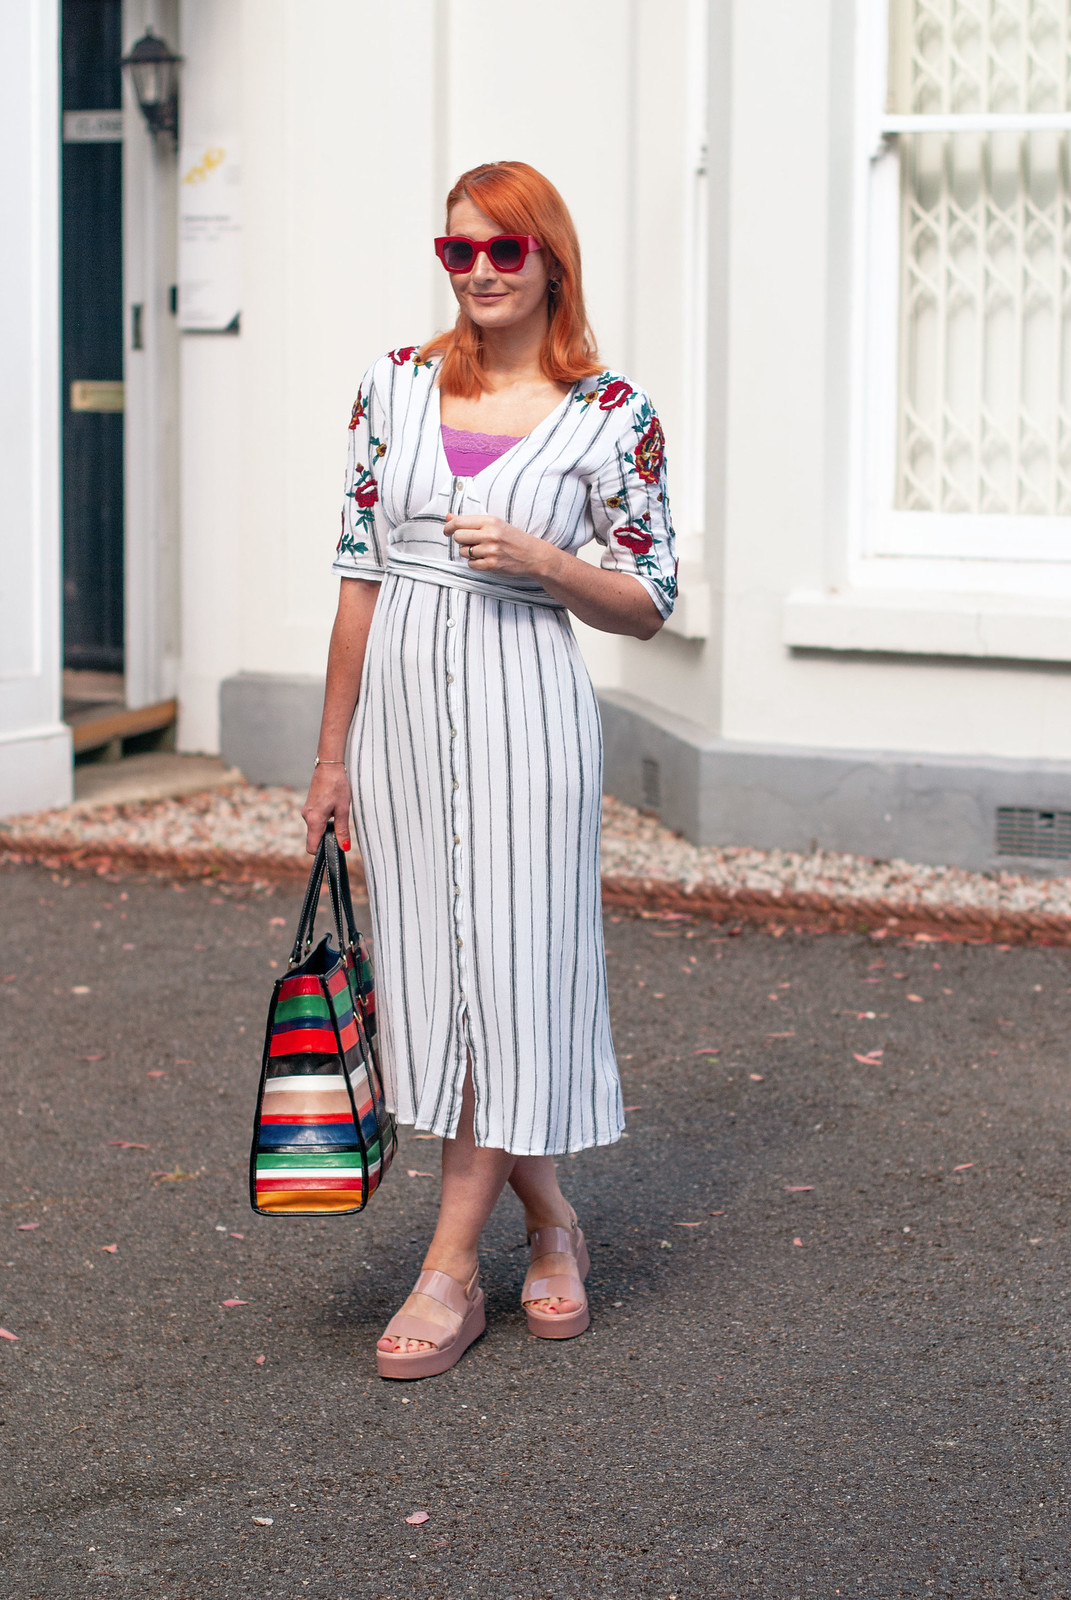 A White Summer Dress That Got All The Compliments - Embroidered Striped White Dress, Blush Pink Flatform Sandals, Striped Leather Tote | Not Dressed As Lamb, Over 40 Fashion